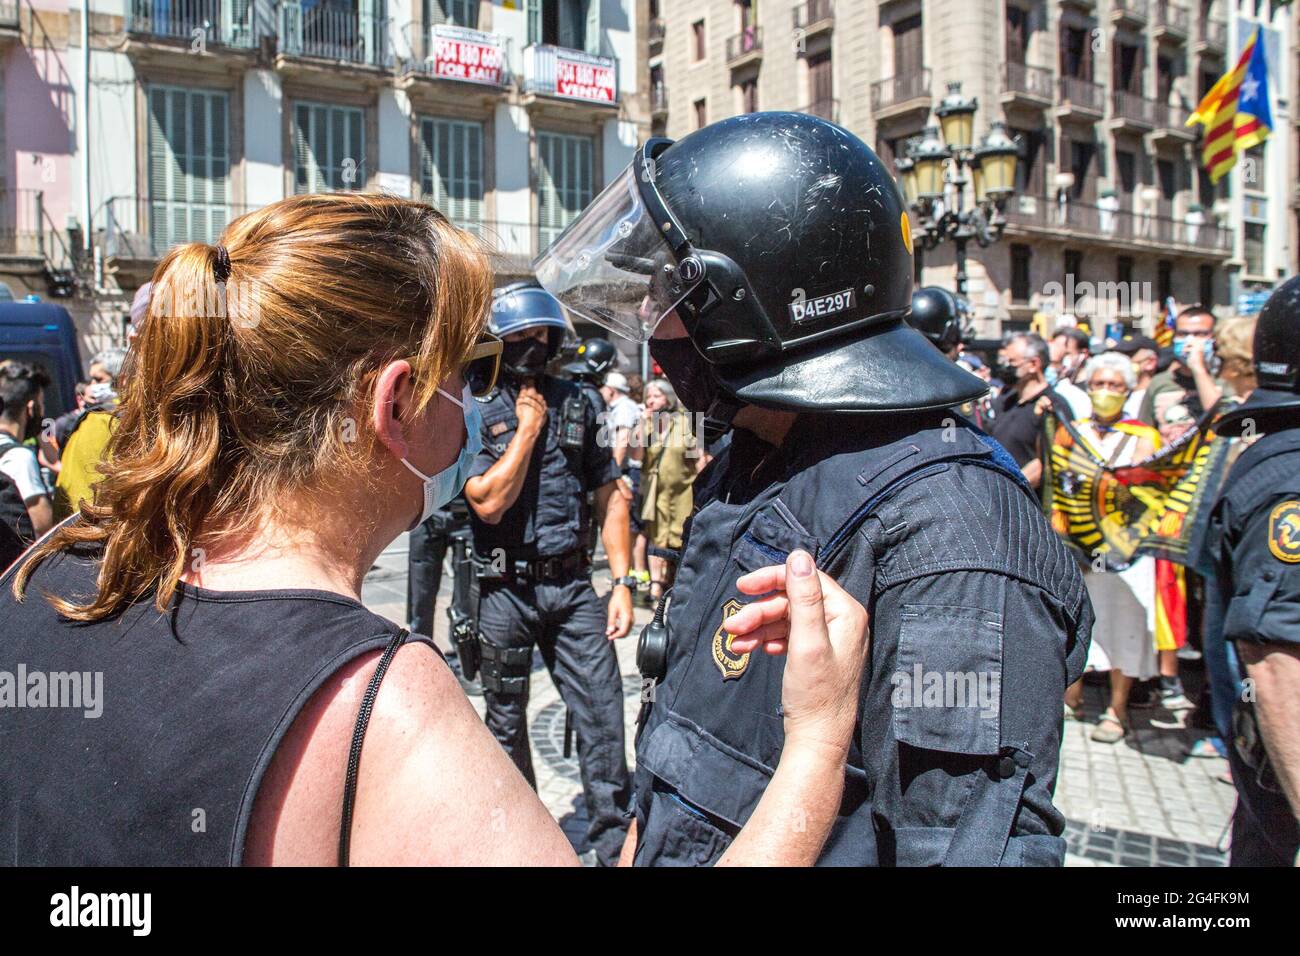 June 21, 2021, Barcelona, Catalonia, Spain: Protester is seen talking to police.Hundreds of Catalan independentistas have demonstrated this Monday, June 21, in Las Ramblas in Barcelona, in front of the Gran Teatre del Liceu (Great Theater of the Lyceum), shielded by many policemen, to protest the visit of the President of the Spanish Government, Pedro Sanchez, who has held a conference entitled ''Reunion: a project for the future for all of Spain'', with the expectation of an imminent granting of pardons for the independence leaders in prison. The protesters protested to denounce that the rep Stock Photo